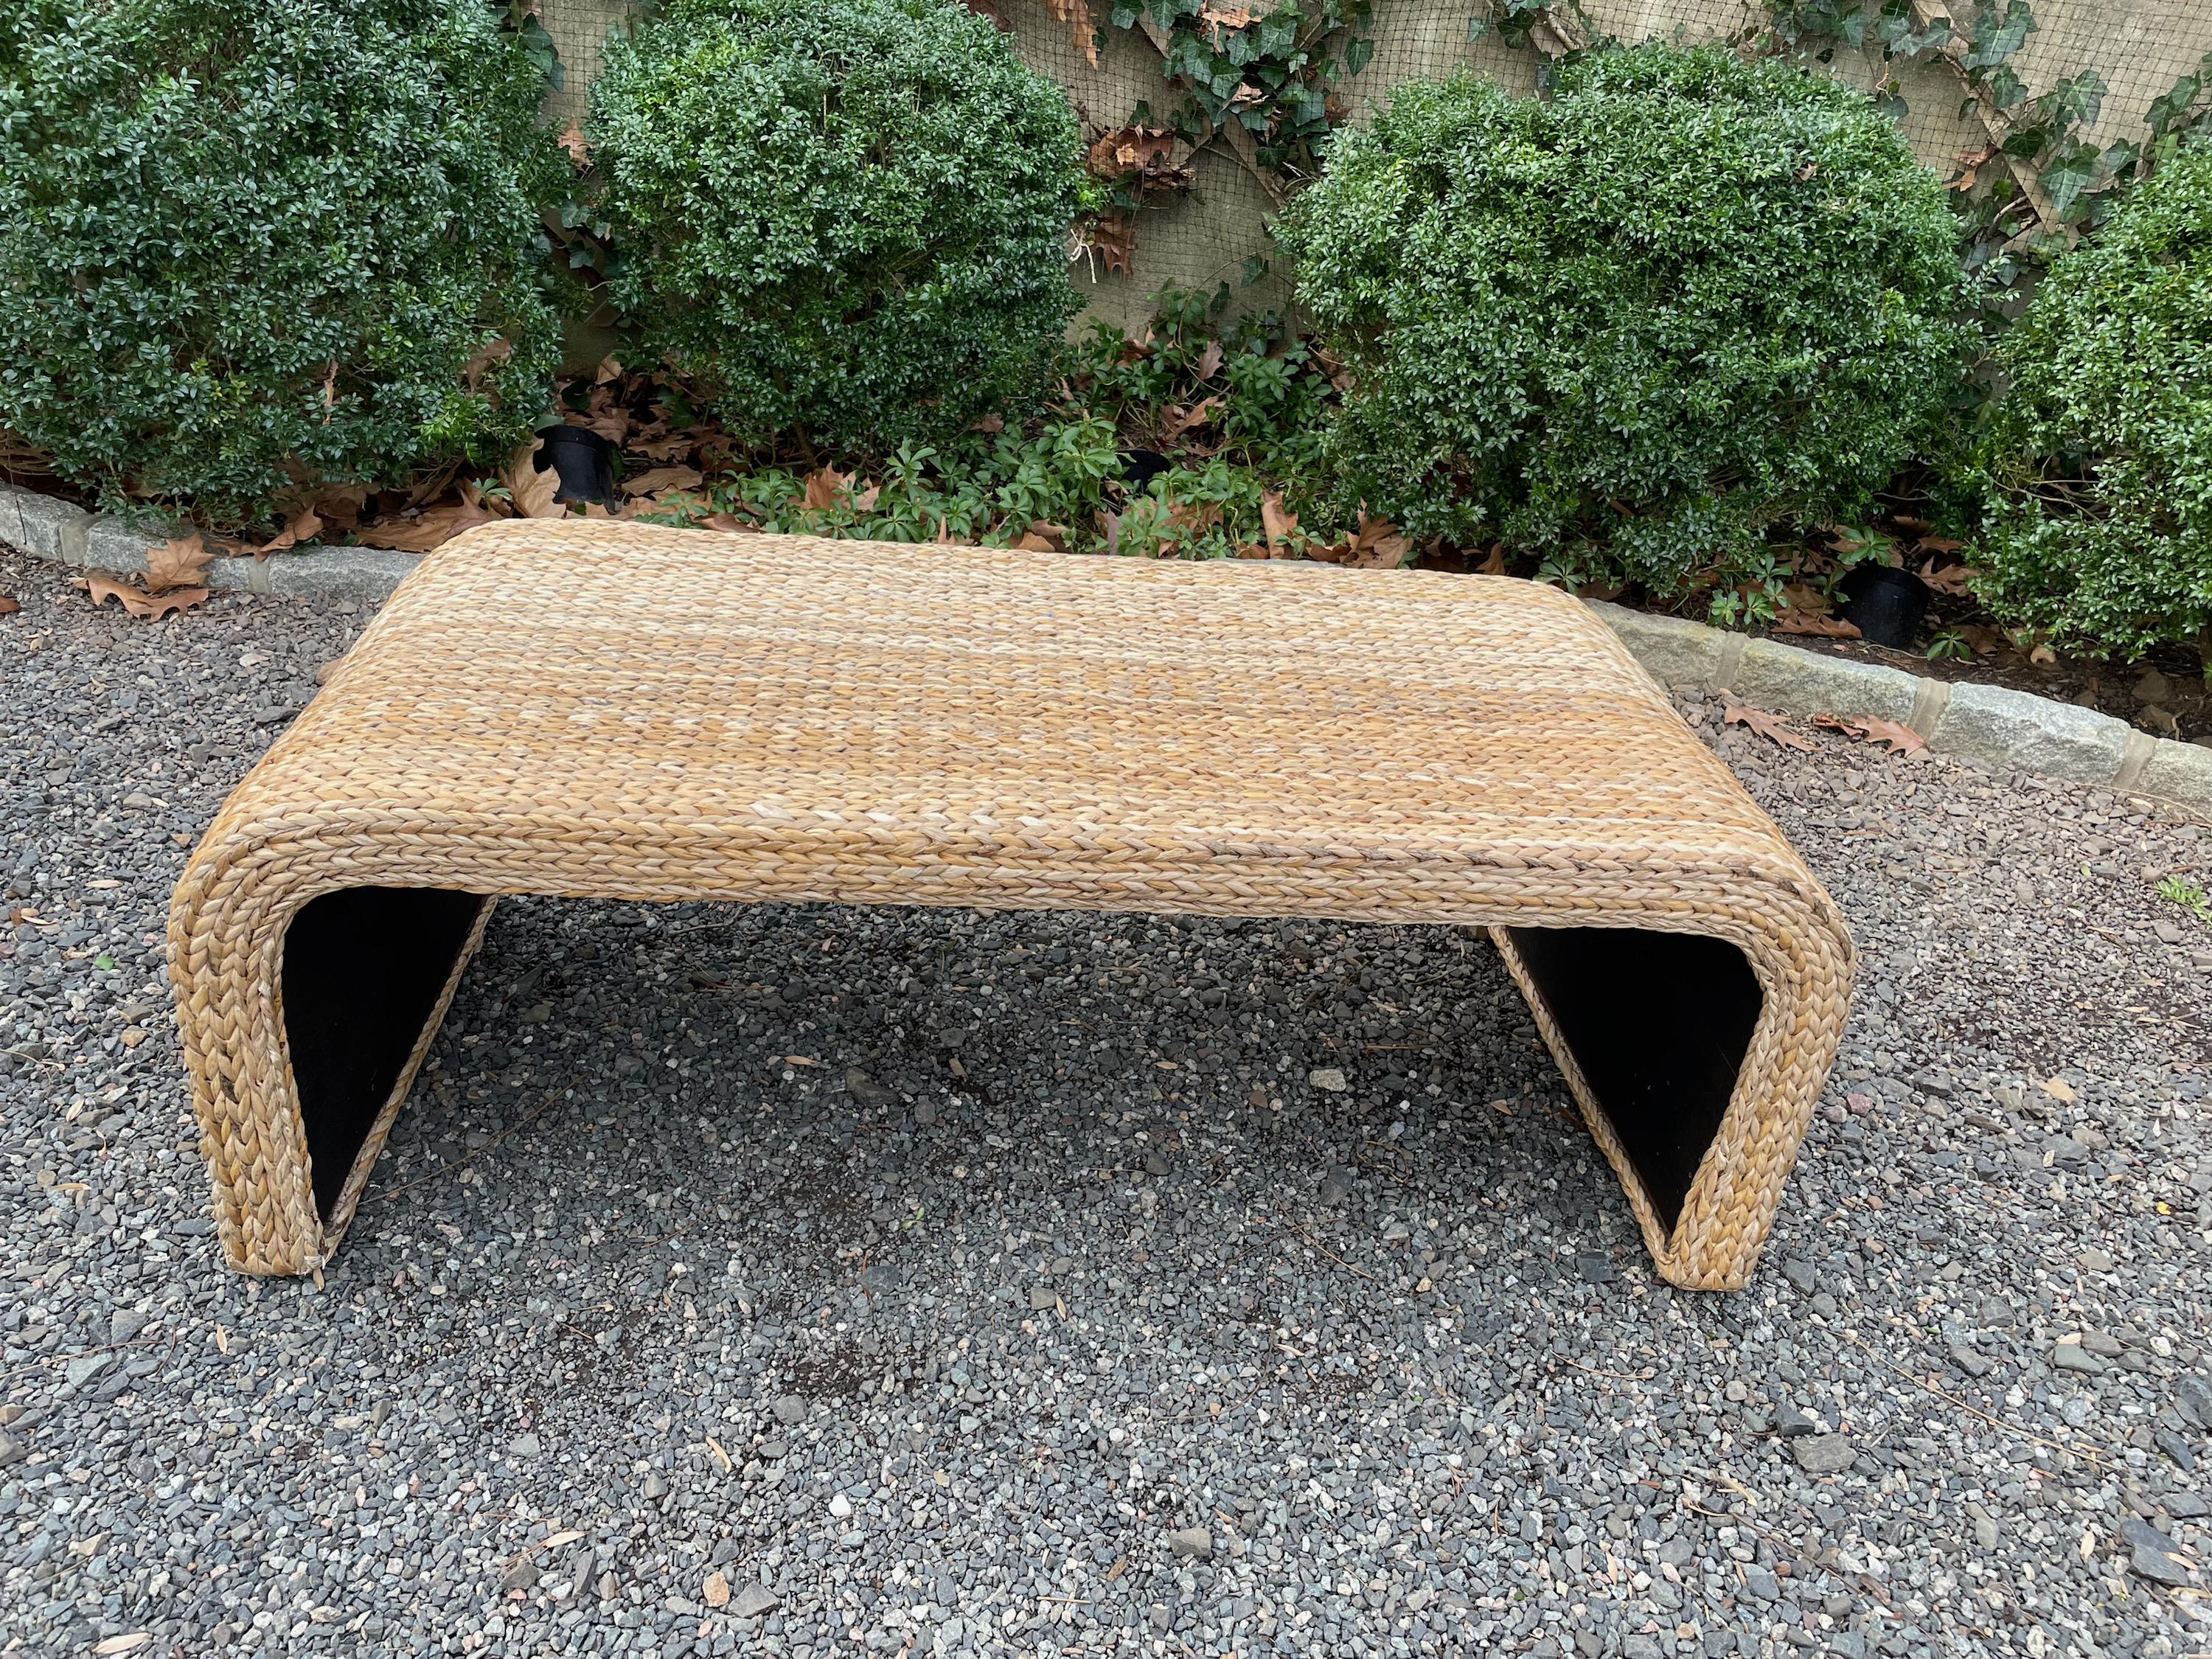 Sophisticated modernist waterfall style coffee table constructed of wood and braided natural grass. The table has arched sides and the underside is painted black.
The striations in color are natural to the grasses.